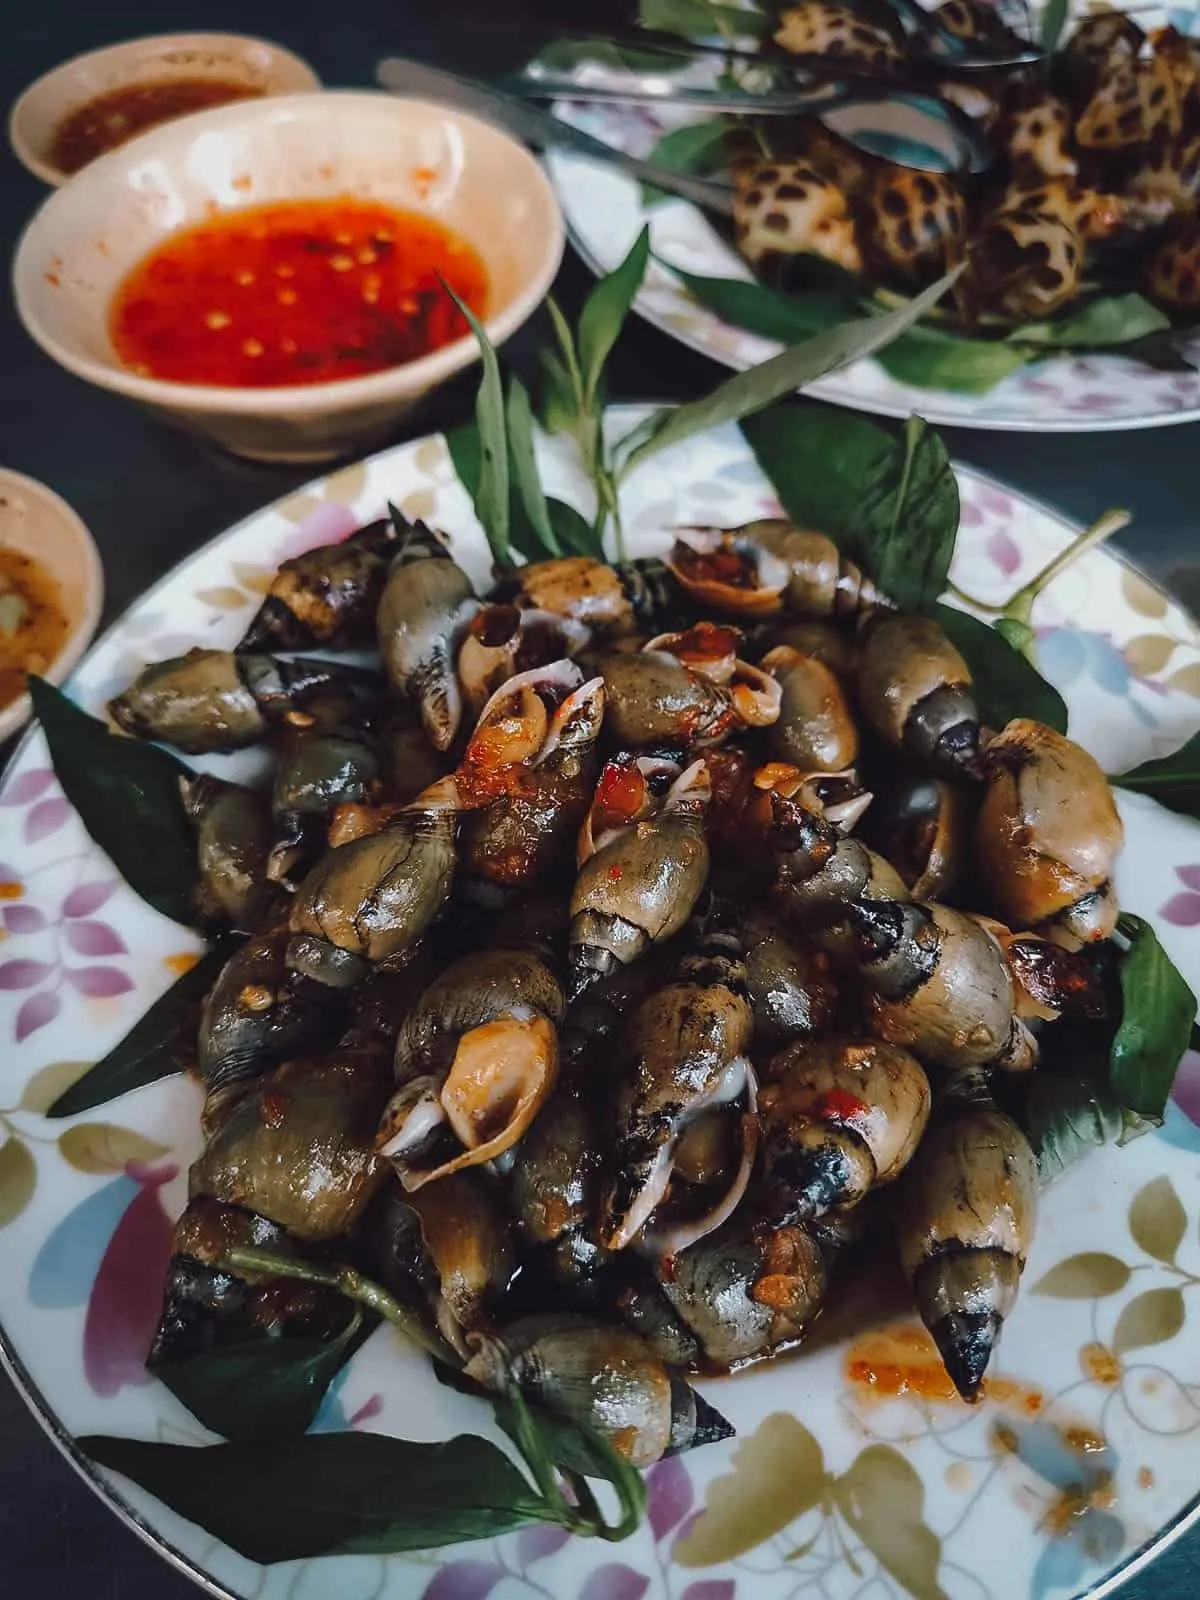 Snails at Mrs Truoc's Snail Stall in Saigon